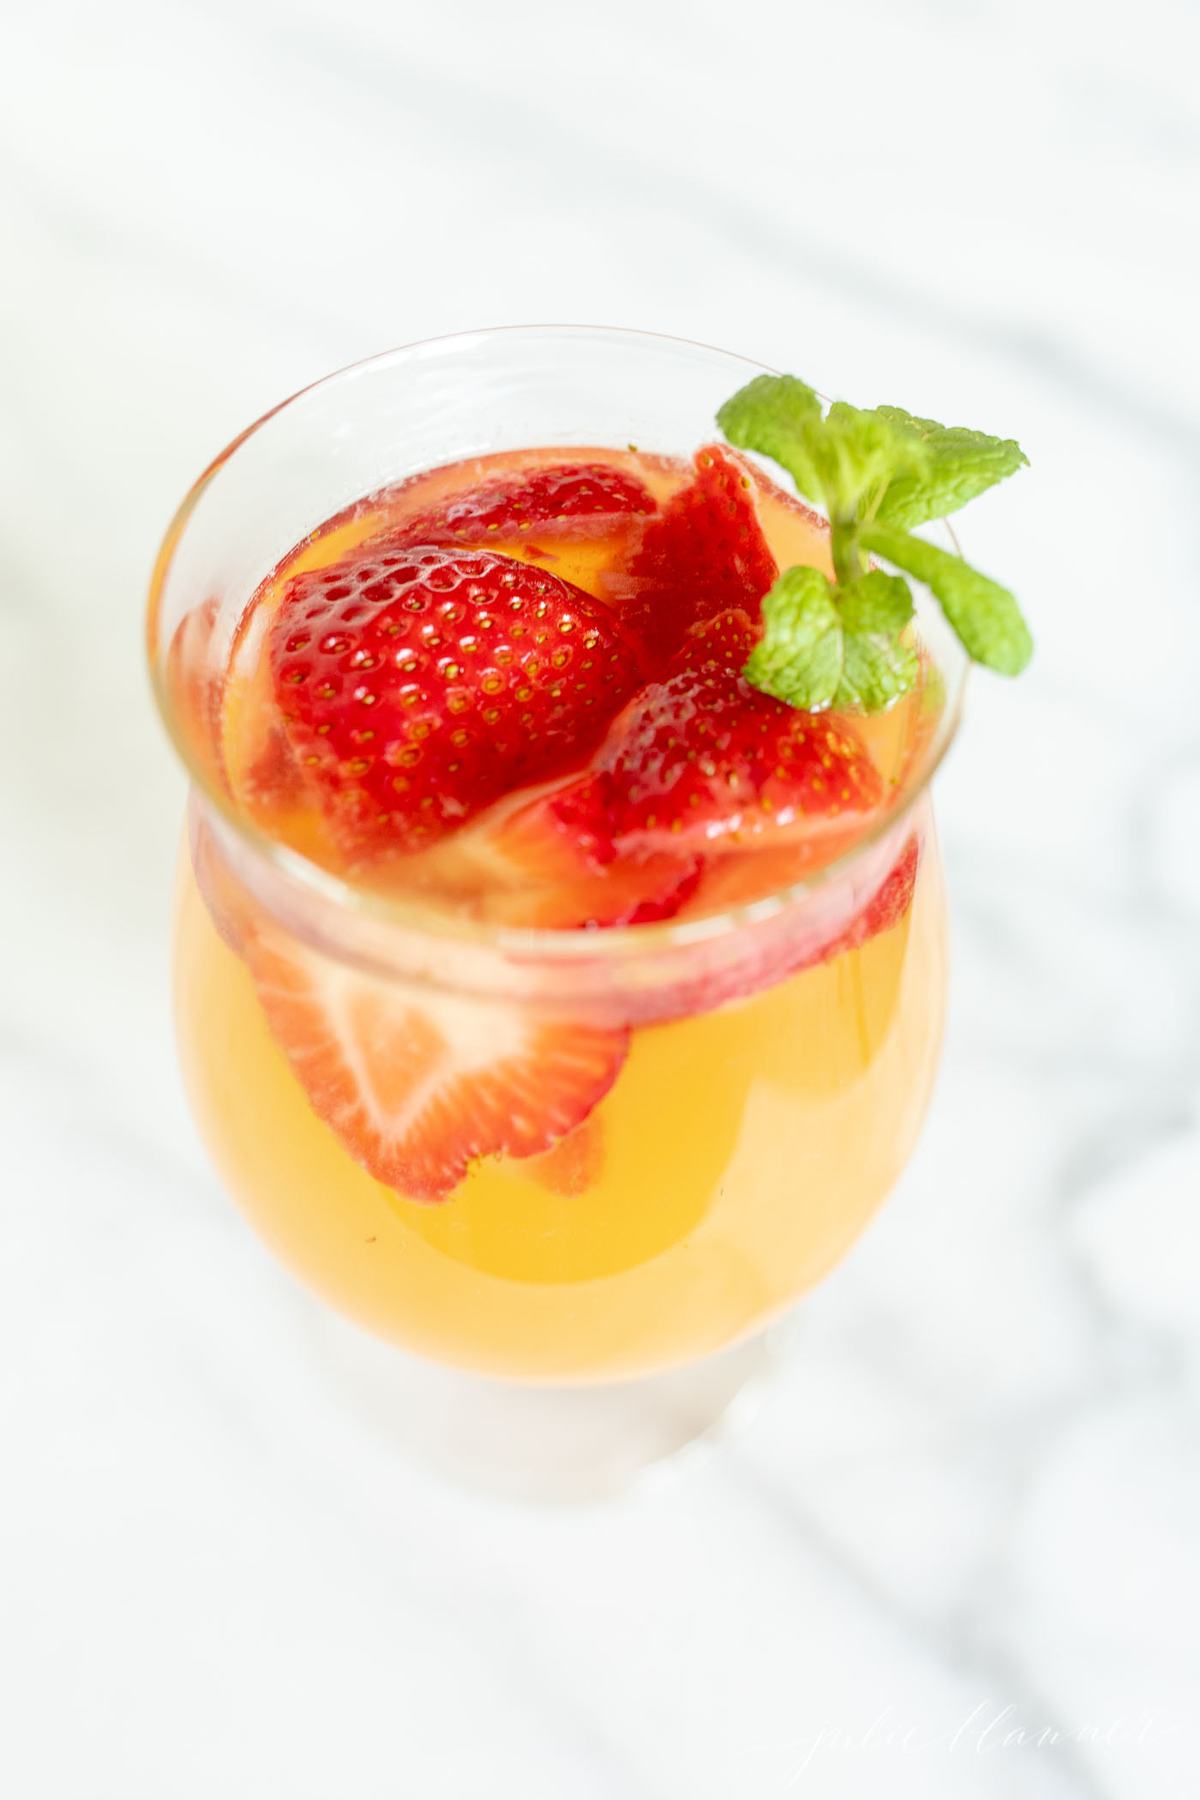 fruity sangria recipe in a glass with peaches, strawberries and garnished with mint